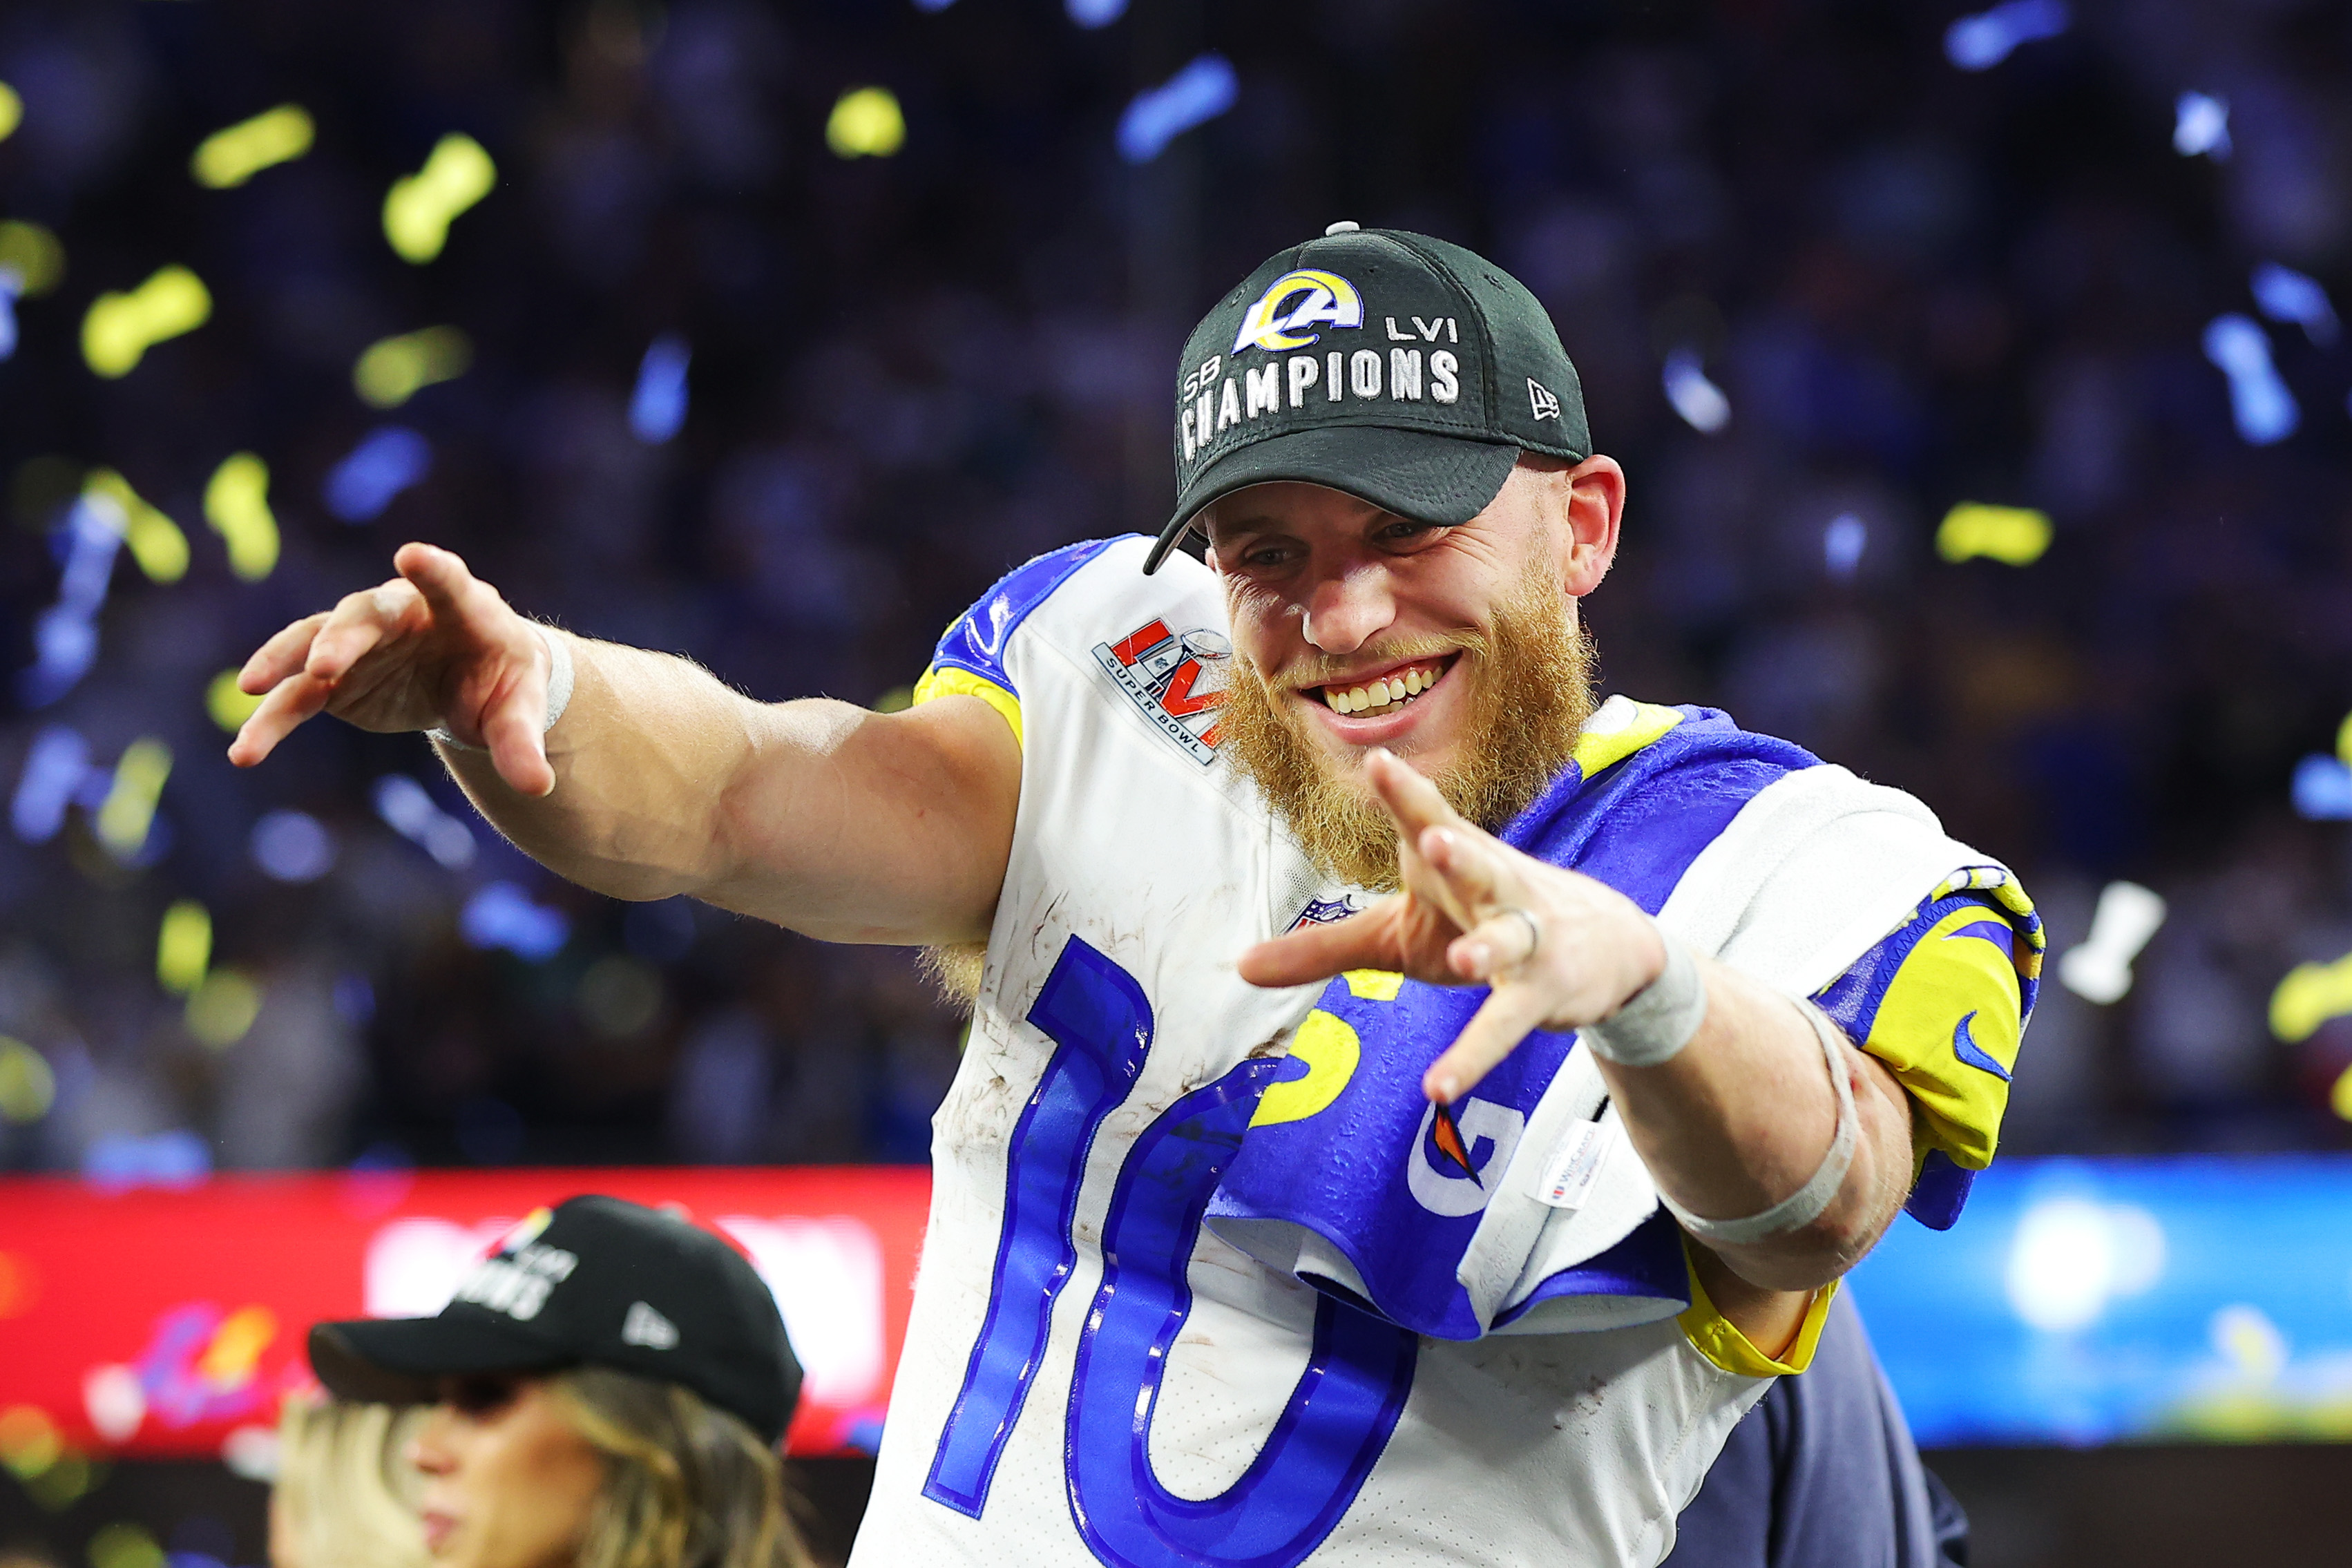 Rams Player Ranked in Top 5 for Fantasy Football in 2022